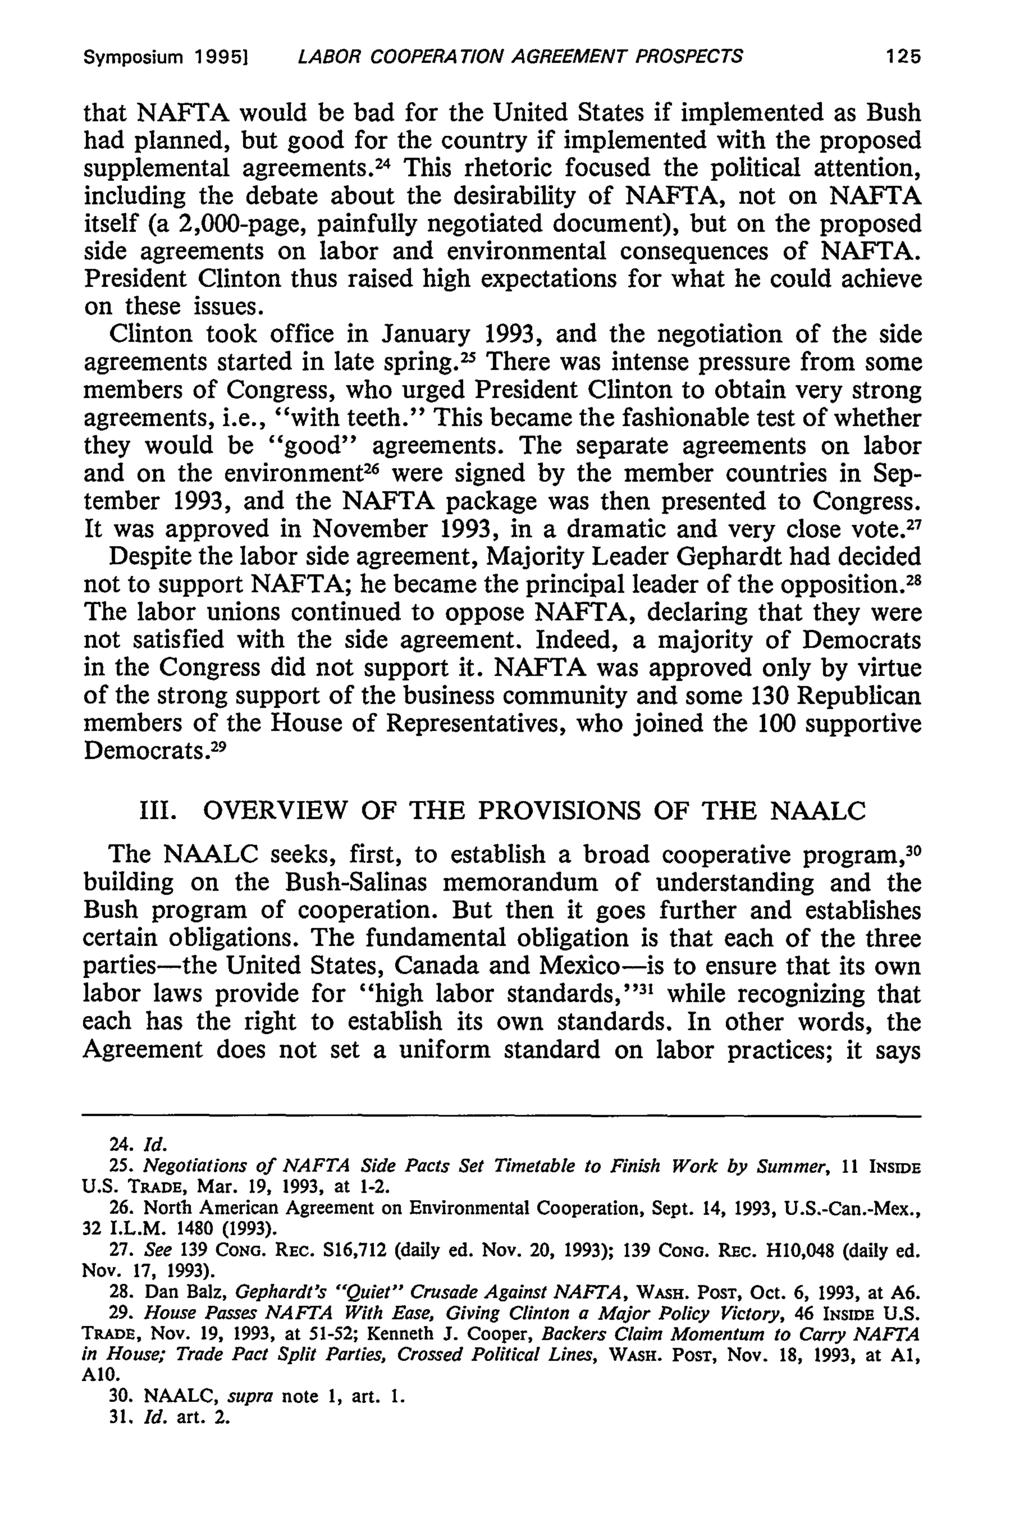 Symposium 1995] LABOR COOPERATION AGREEMENT PROSPECTS that NAFTA would be bad for the United States if implemented as Bush had planned, but good for the country if implemented with the proposed